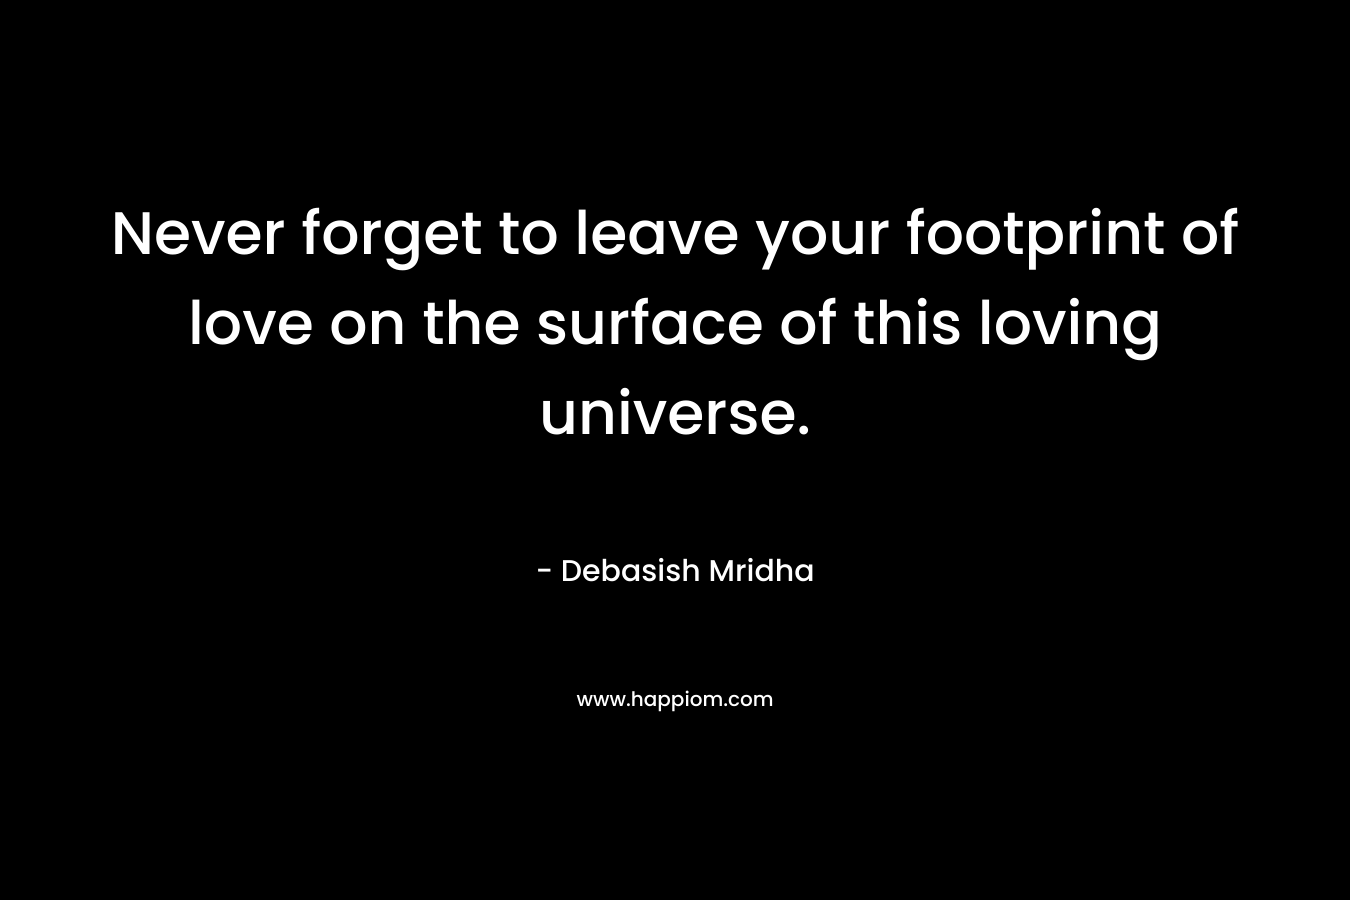 Never forget to leave your footprint of love on the surface of this loving universe.